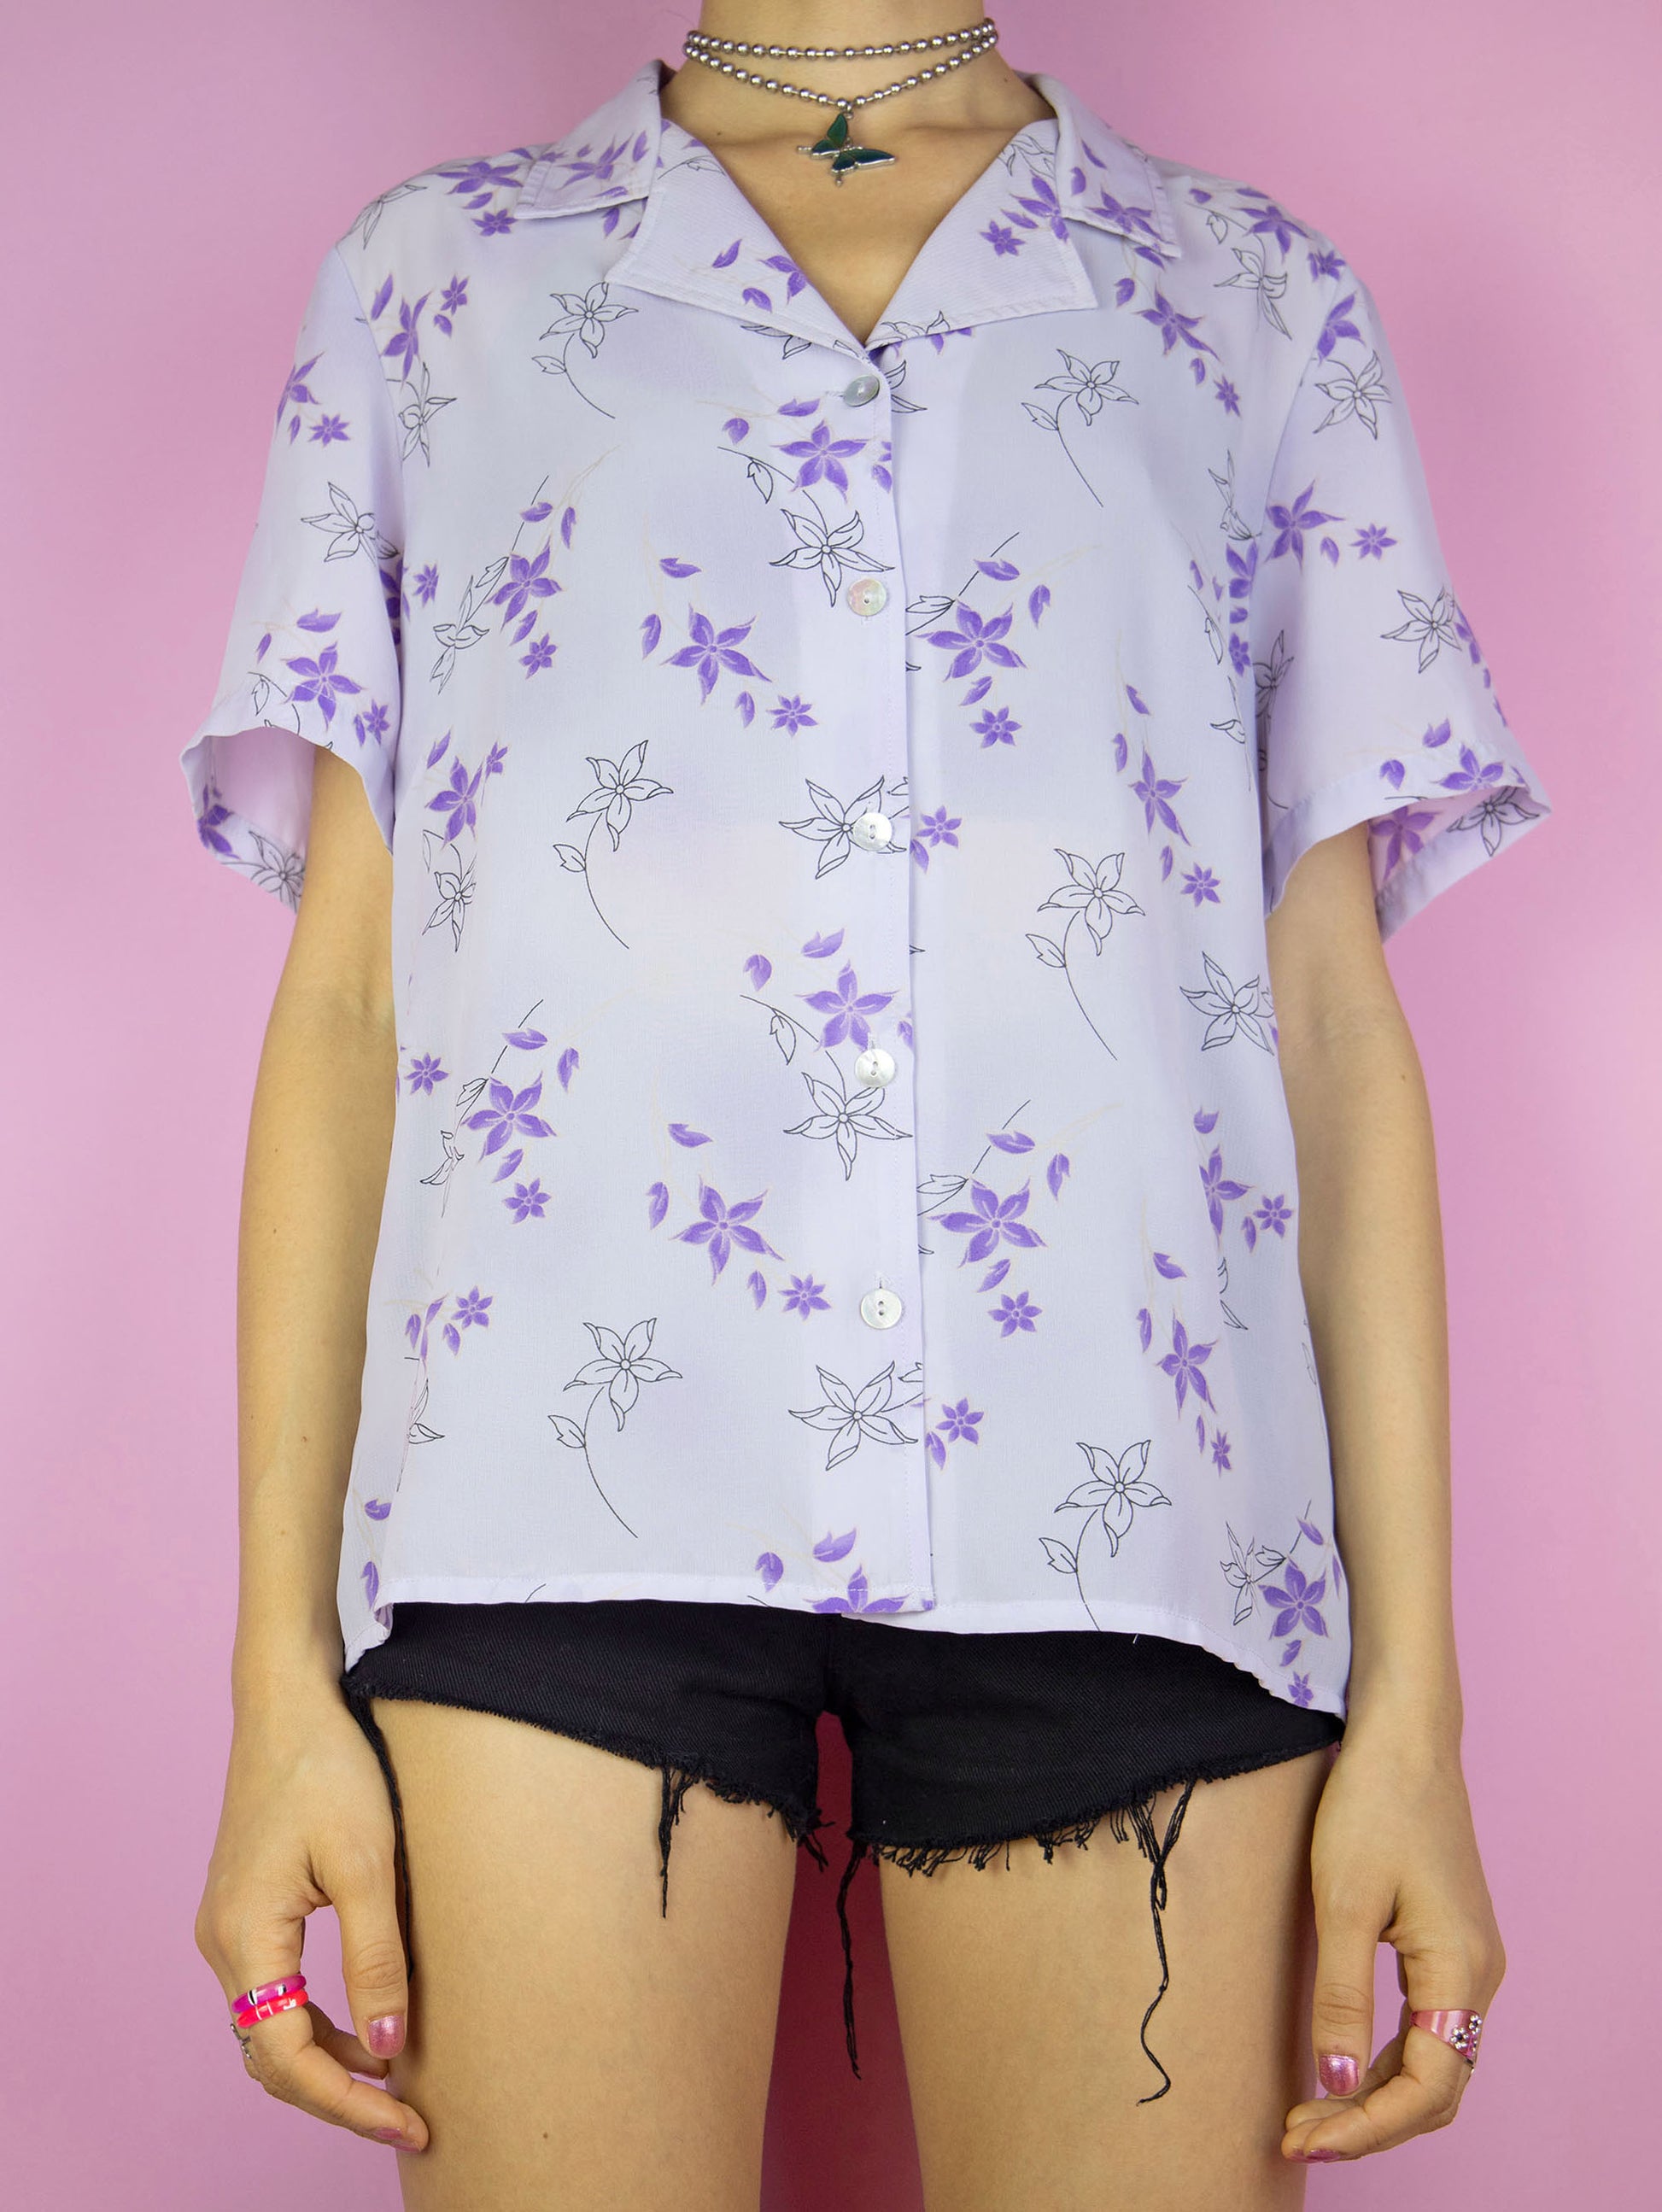 The Y2K Lilac Floral Boho Blouse is a vintage light pastel purple floral short sleeve shirt with a collar and buttons. Lovely romantic cottage 2000s summer top.